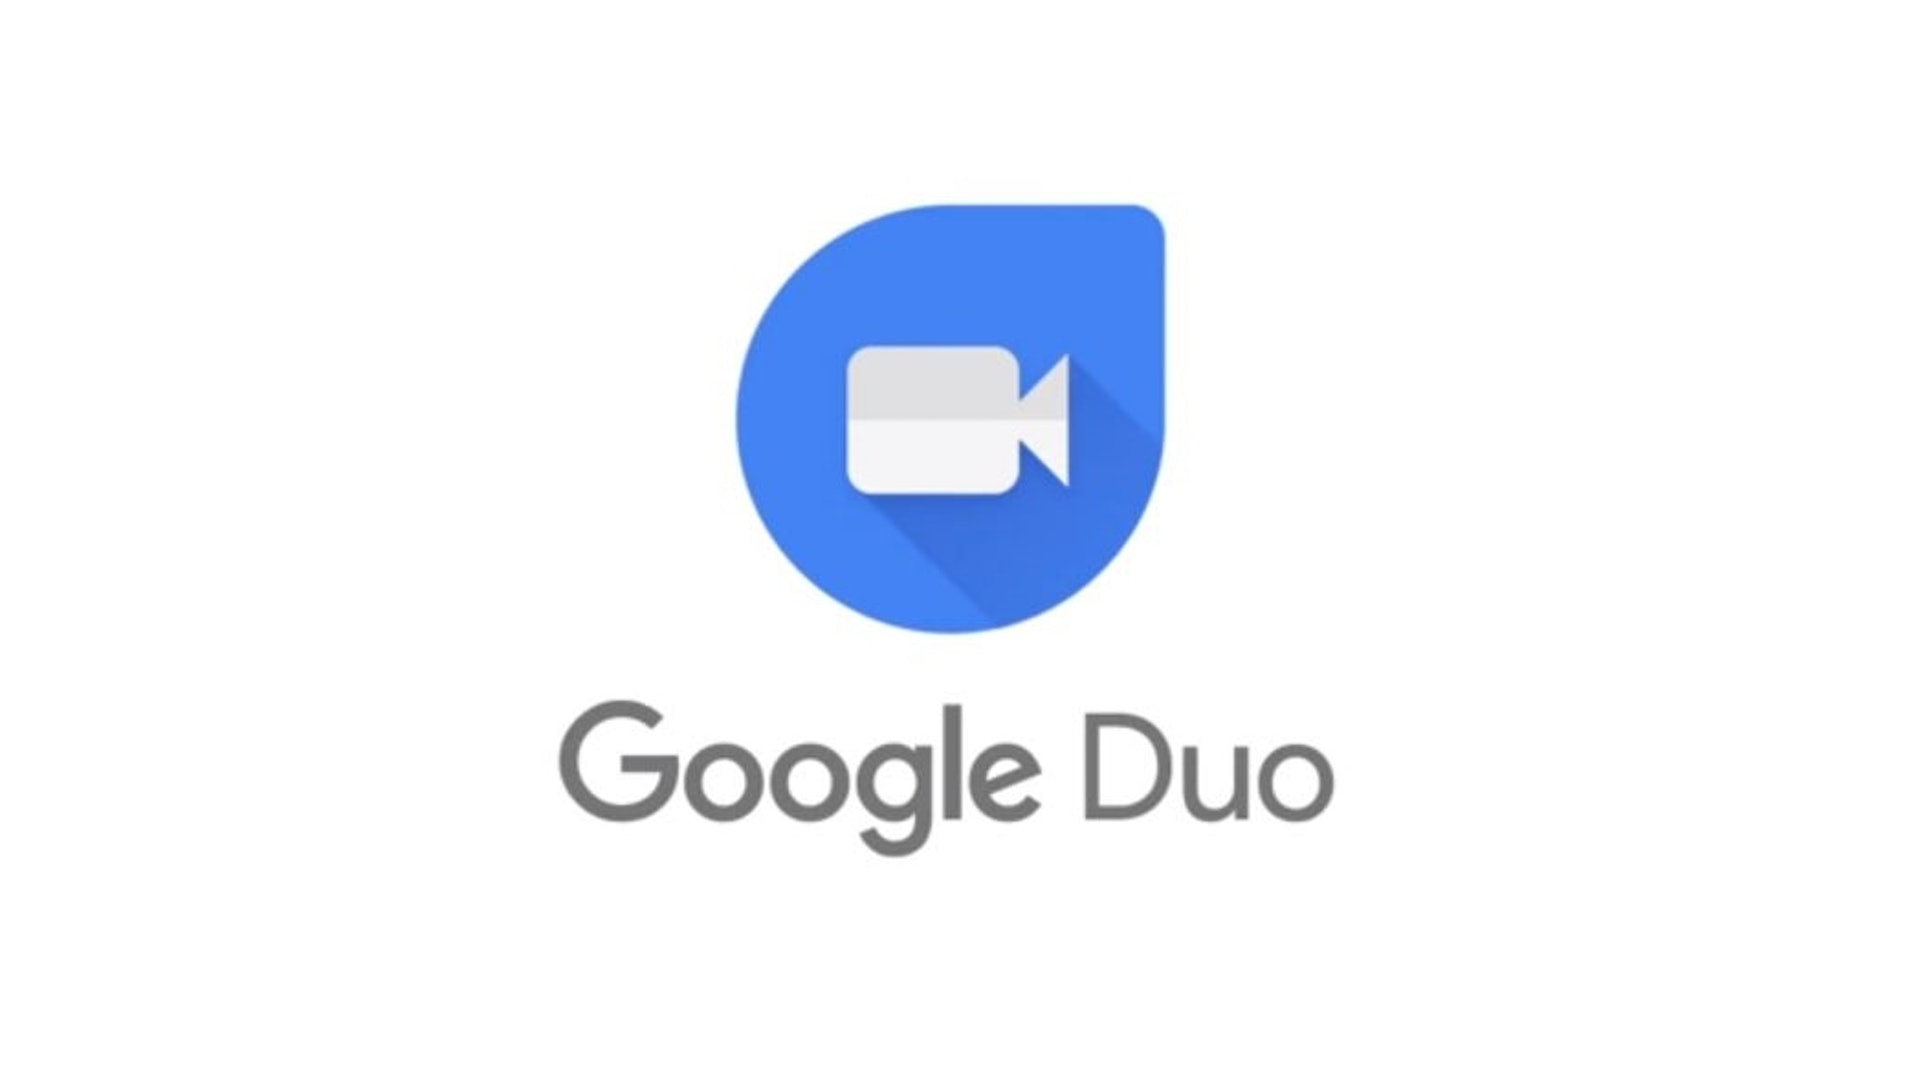 download google video chat